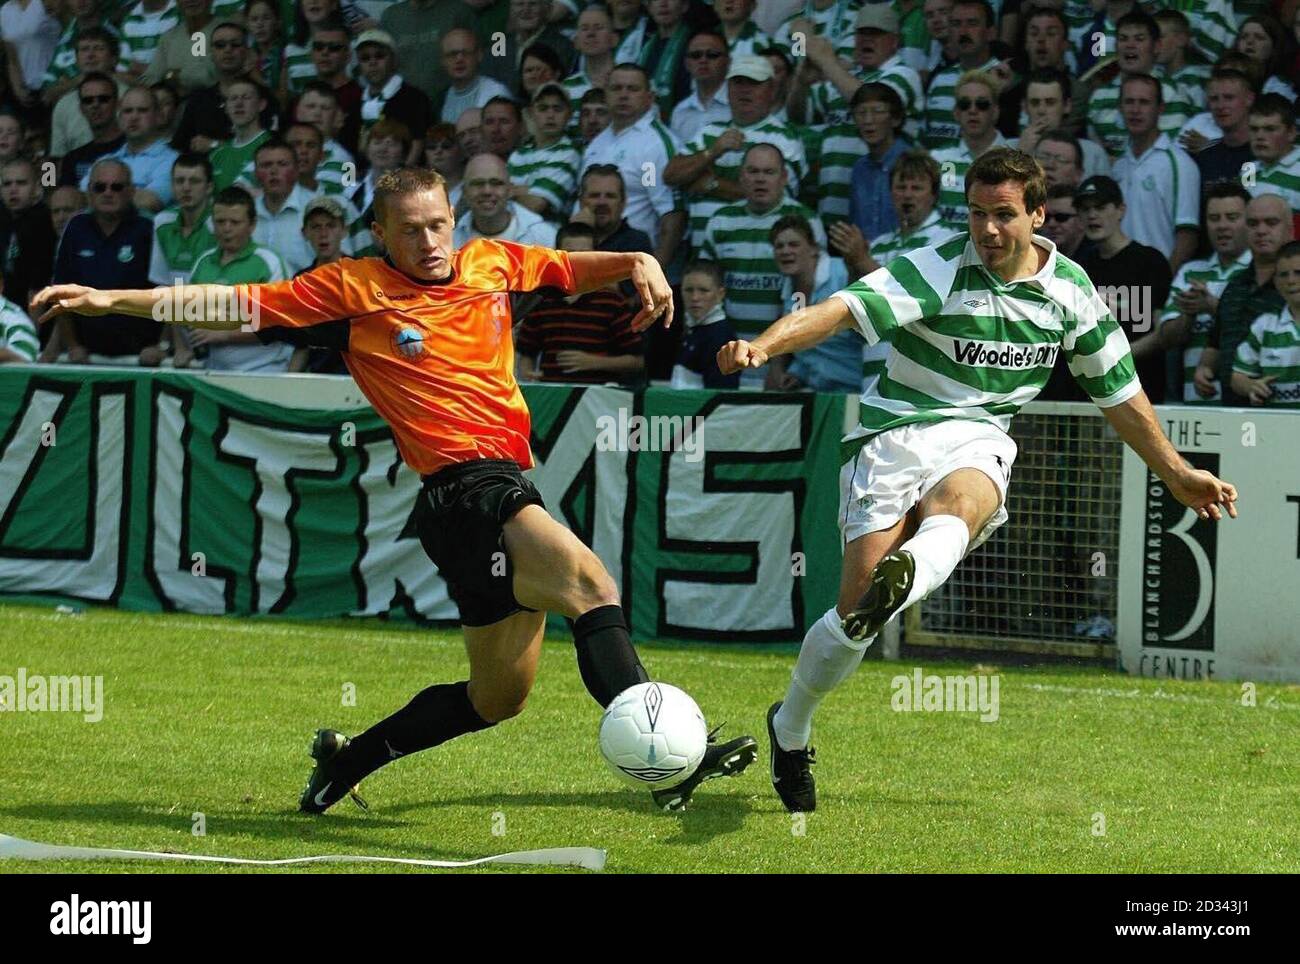 Shamrock Rovers' Stephen Grant (R) and the Czech Republic's Slovan Liberec's Tomas Zapotocny in action during their UEFA InterToto Cup match at Richmond Park, Dublin. Stock Photo